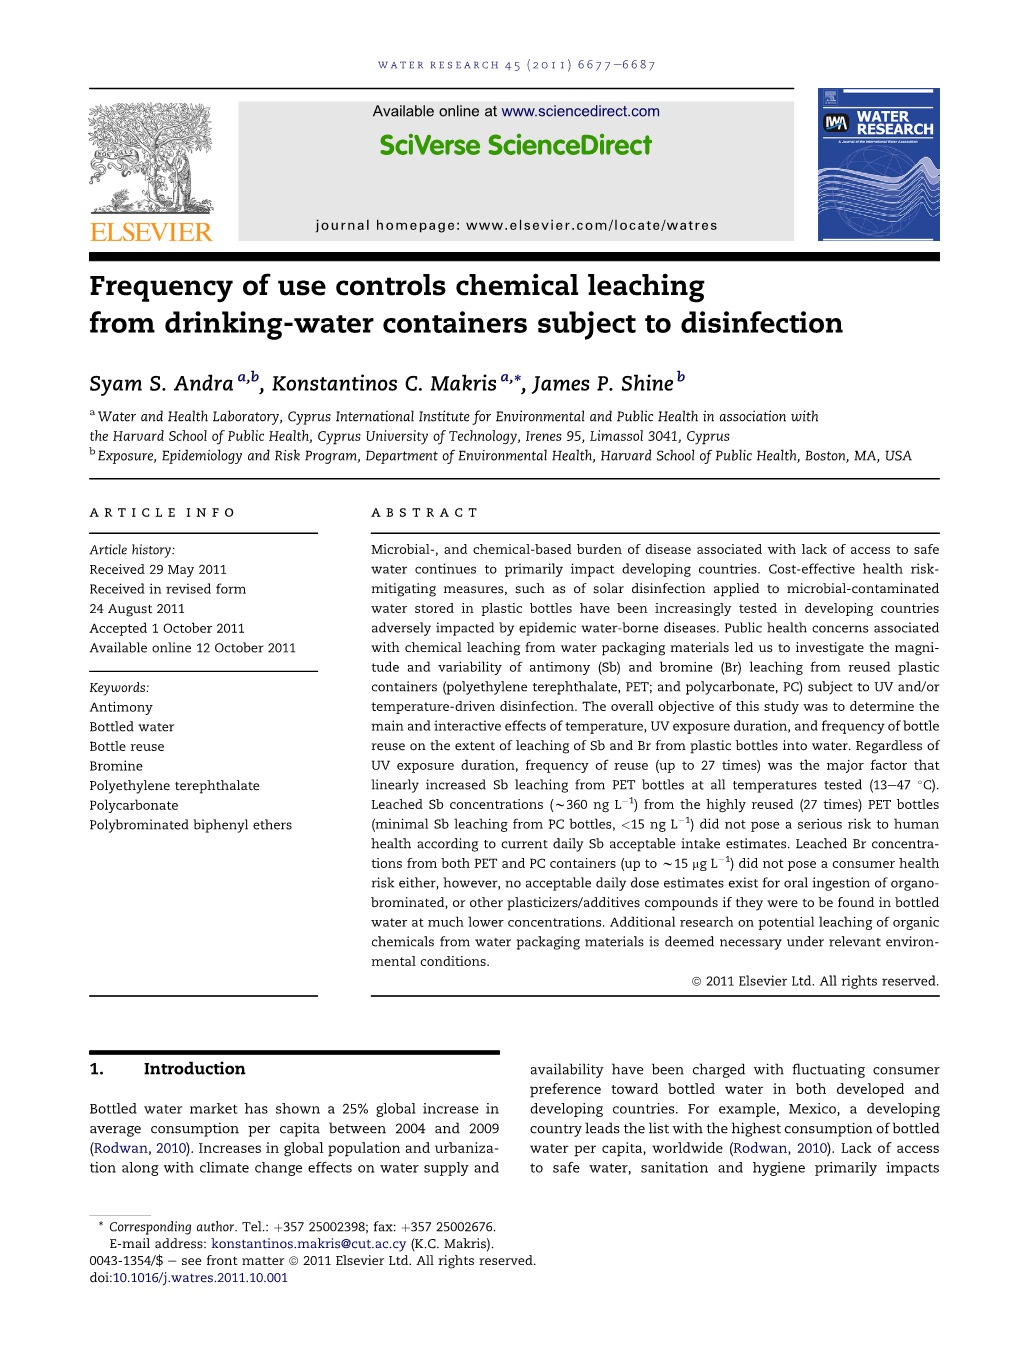 Frequency of Use Controls Chemical Leaching from Drinking-Water Containers Subject to Disinfection